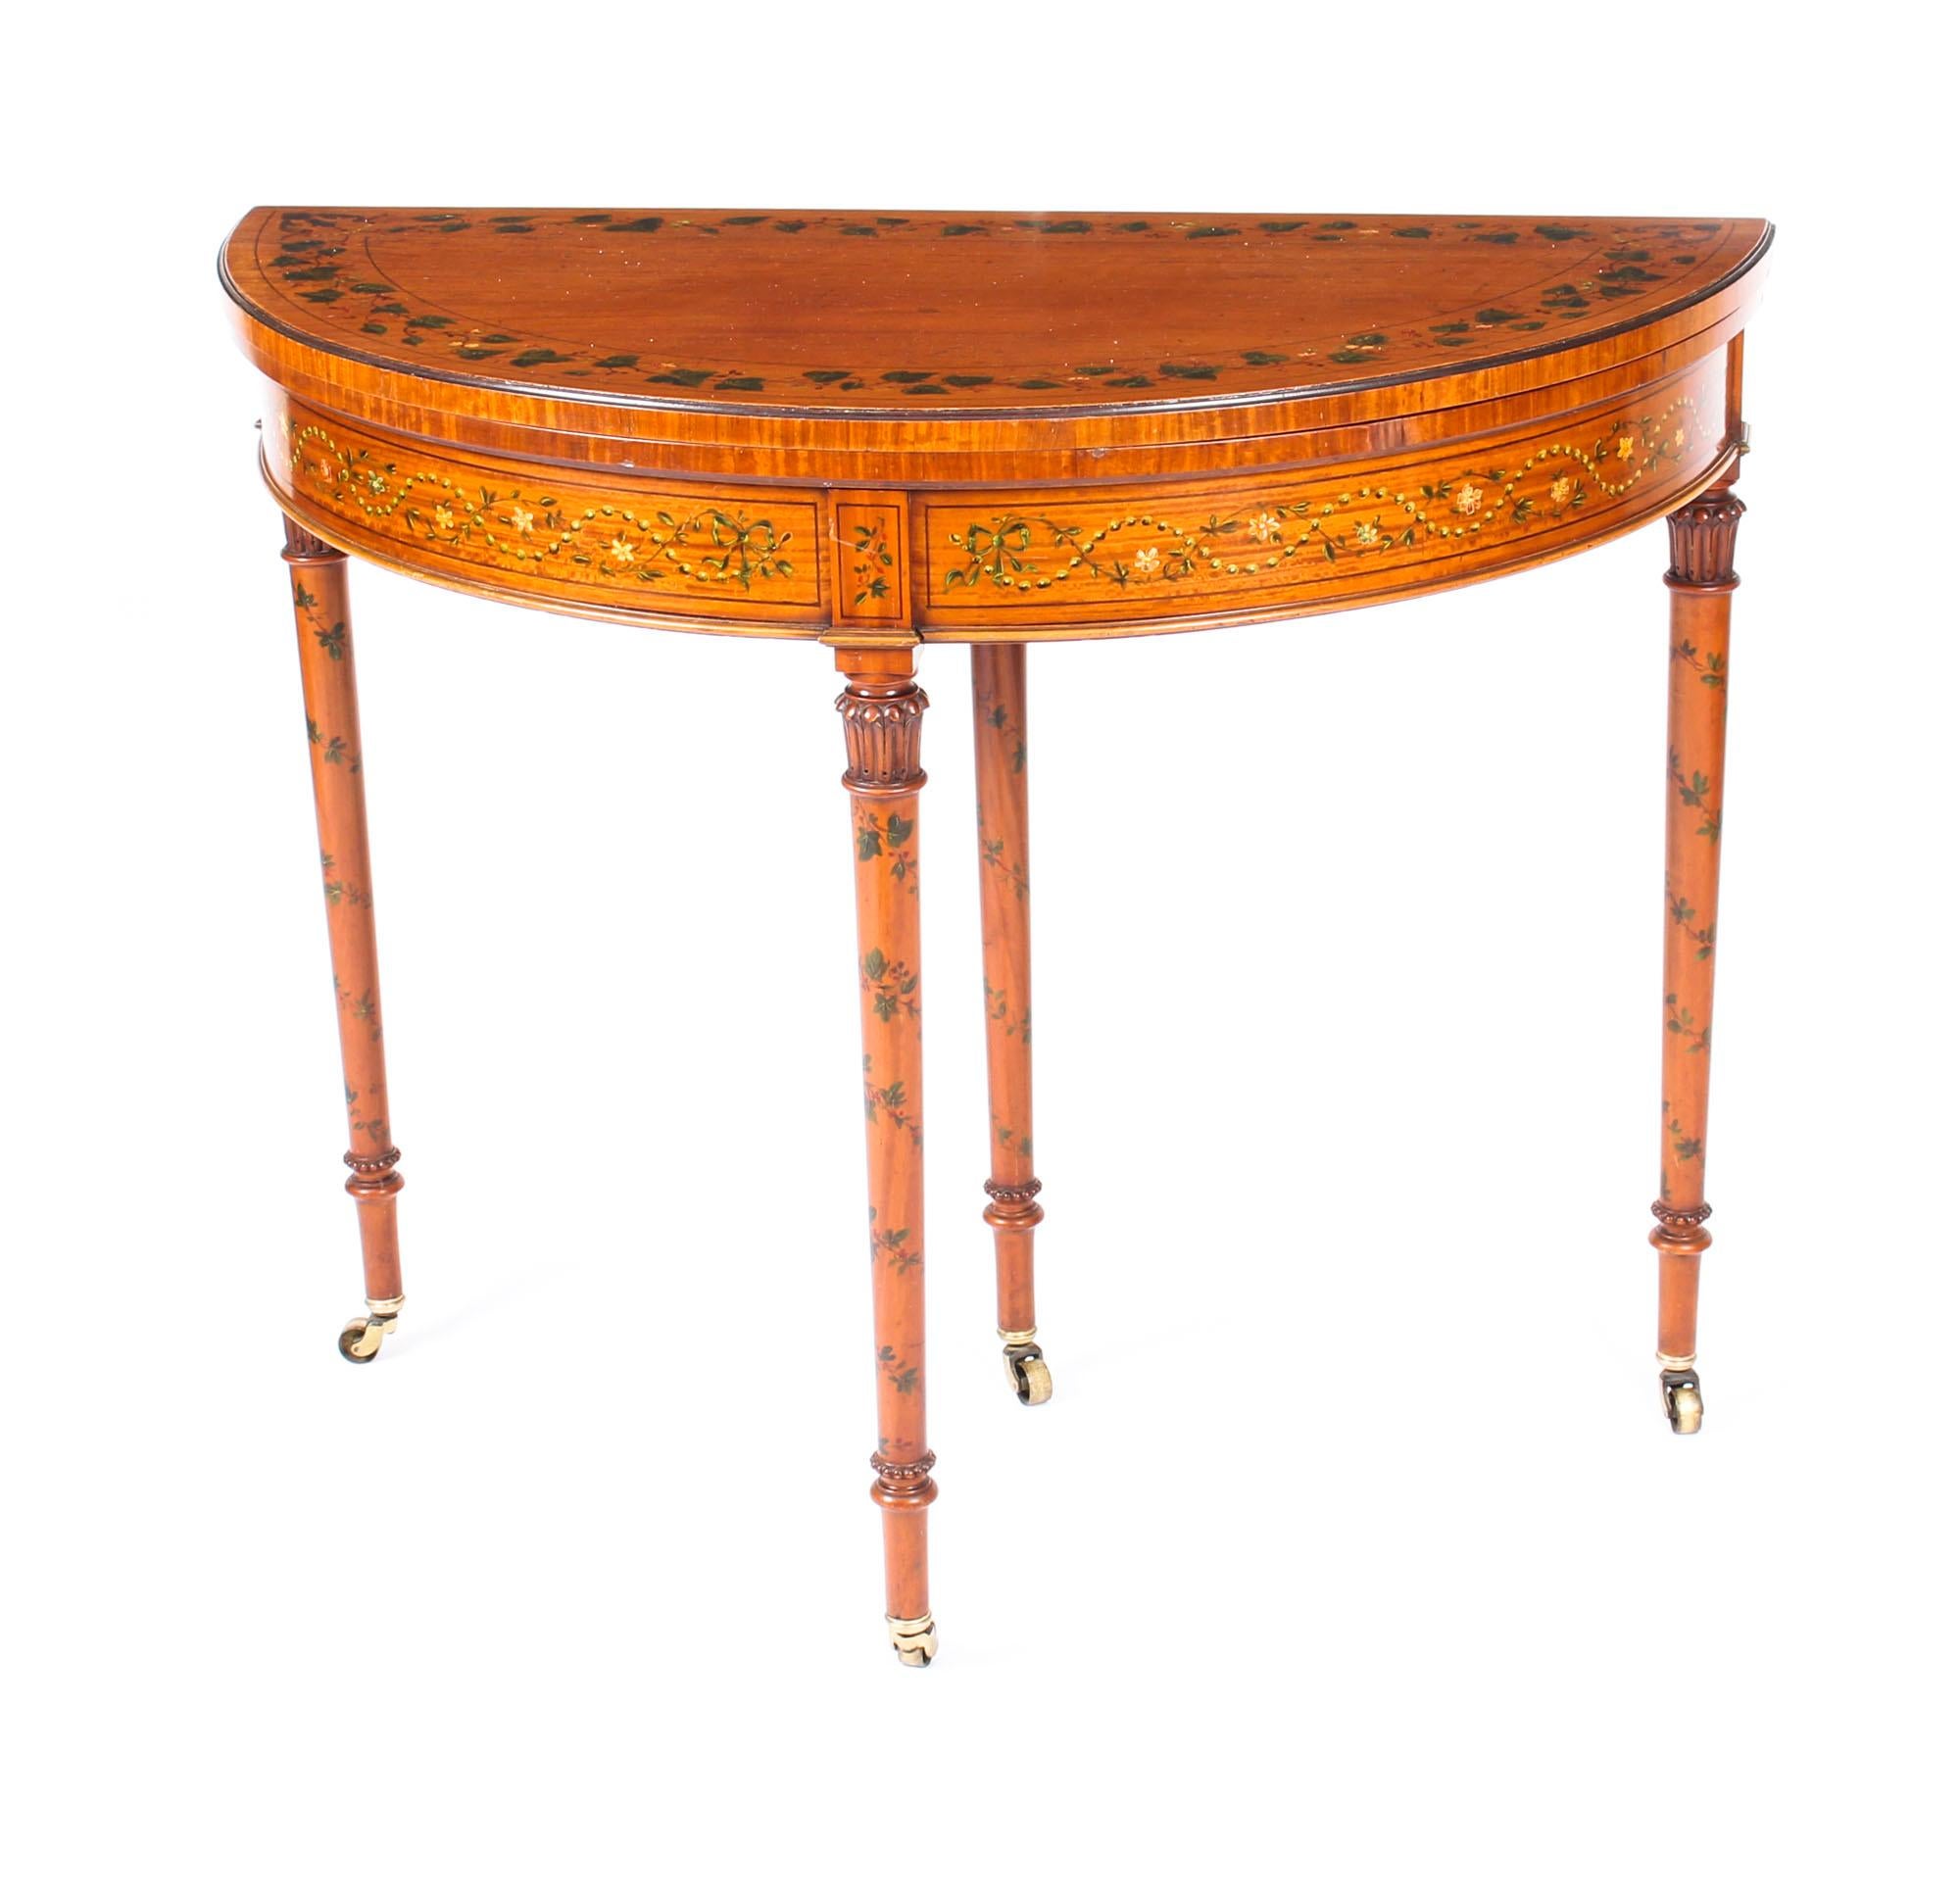 This is a wonderful antique hand painted satinwood Sheraton Revival demilune card table, circa 1890 in date.

The folding top enclosing an inset baize lined playing surface. It is decorated throughout with hand painted bands of trailing vines and